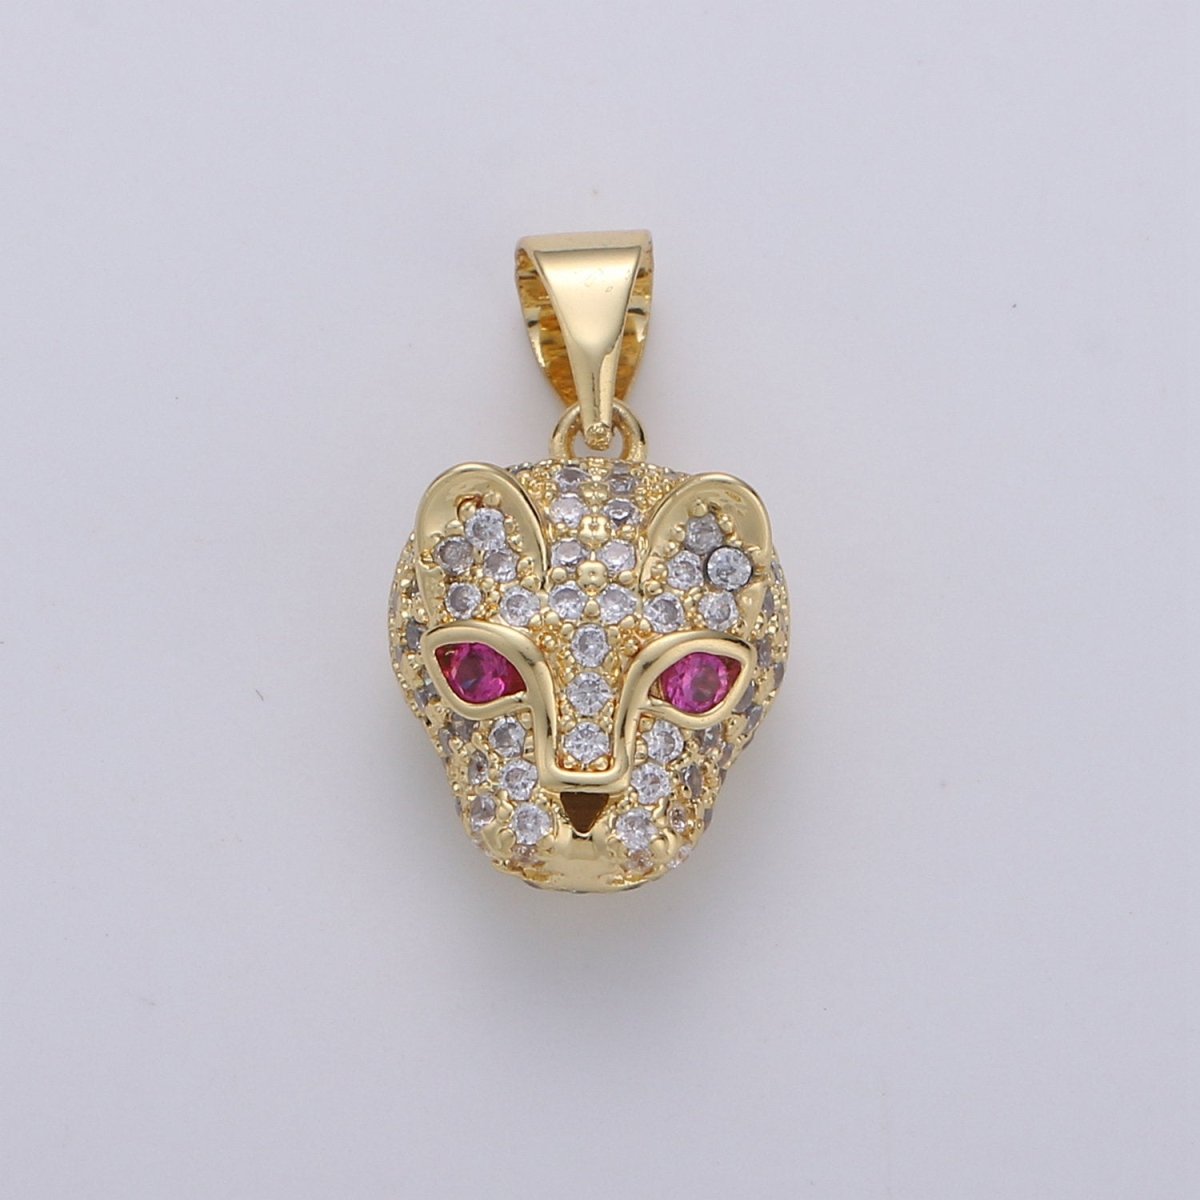 24K Gold Filled Panther Charm Micro Pave Pendant for DIY Jewelry Making, Gold Animal Jewelry for Necklace Bracelet Supply I-814 - DLUXCA